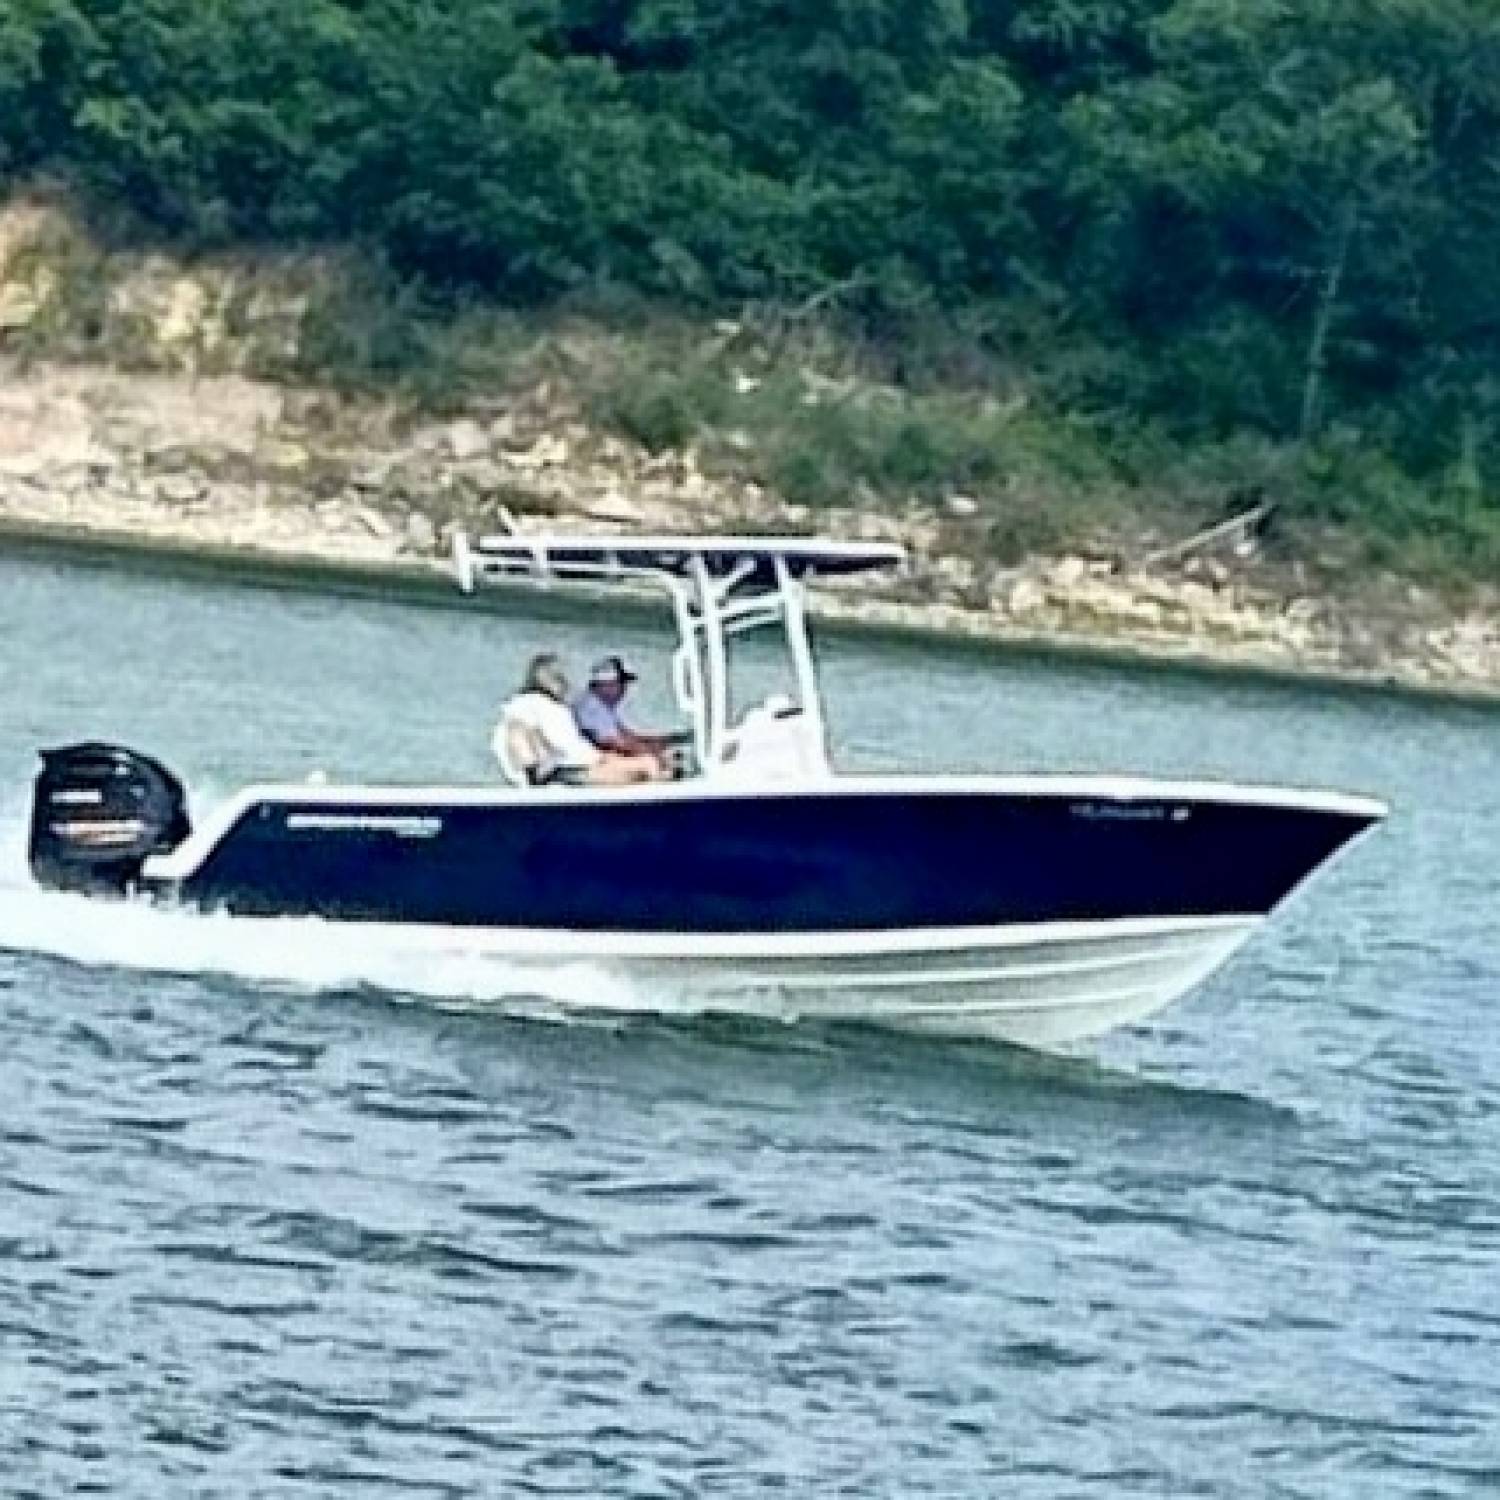 Title: Saturday boat ride - On board their Sportsman Heritage 231 Center Console - Location: Lake Texoma. Participating in the Photo Contest #SportsmanMay